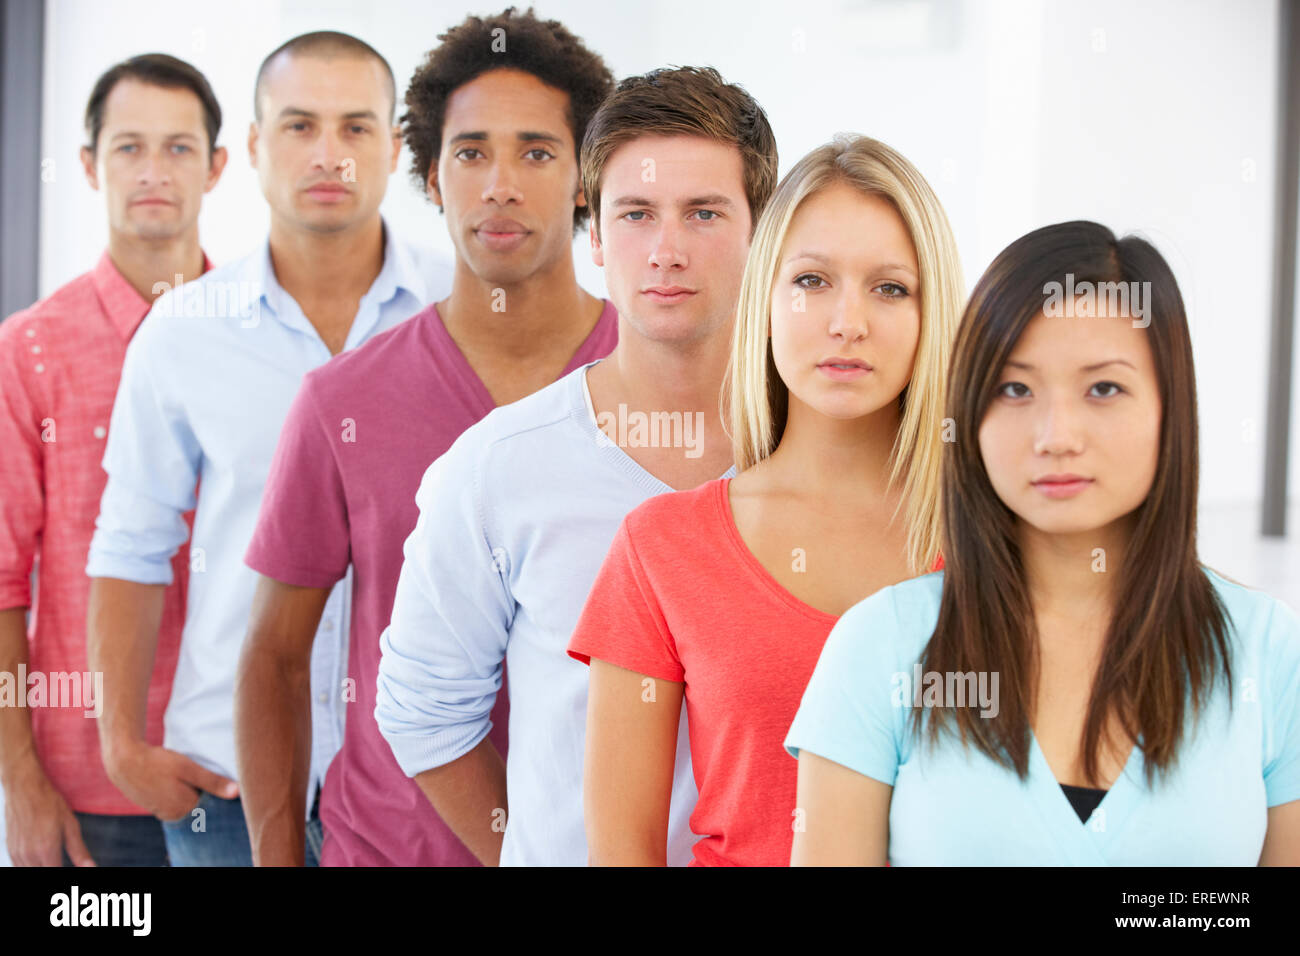 Line Of Young Business People In Casual Dress Stock Photo